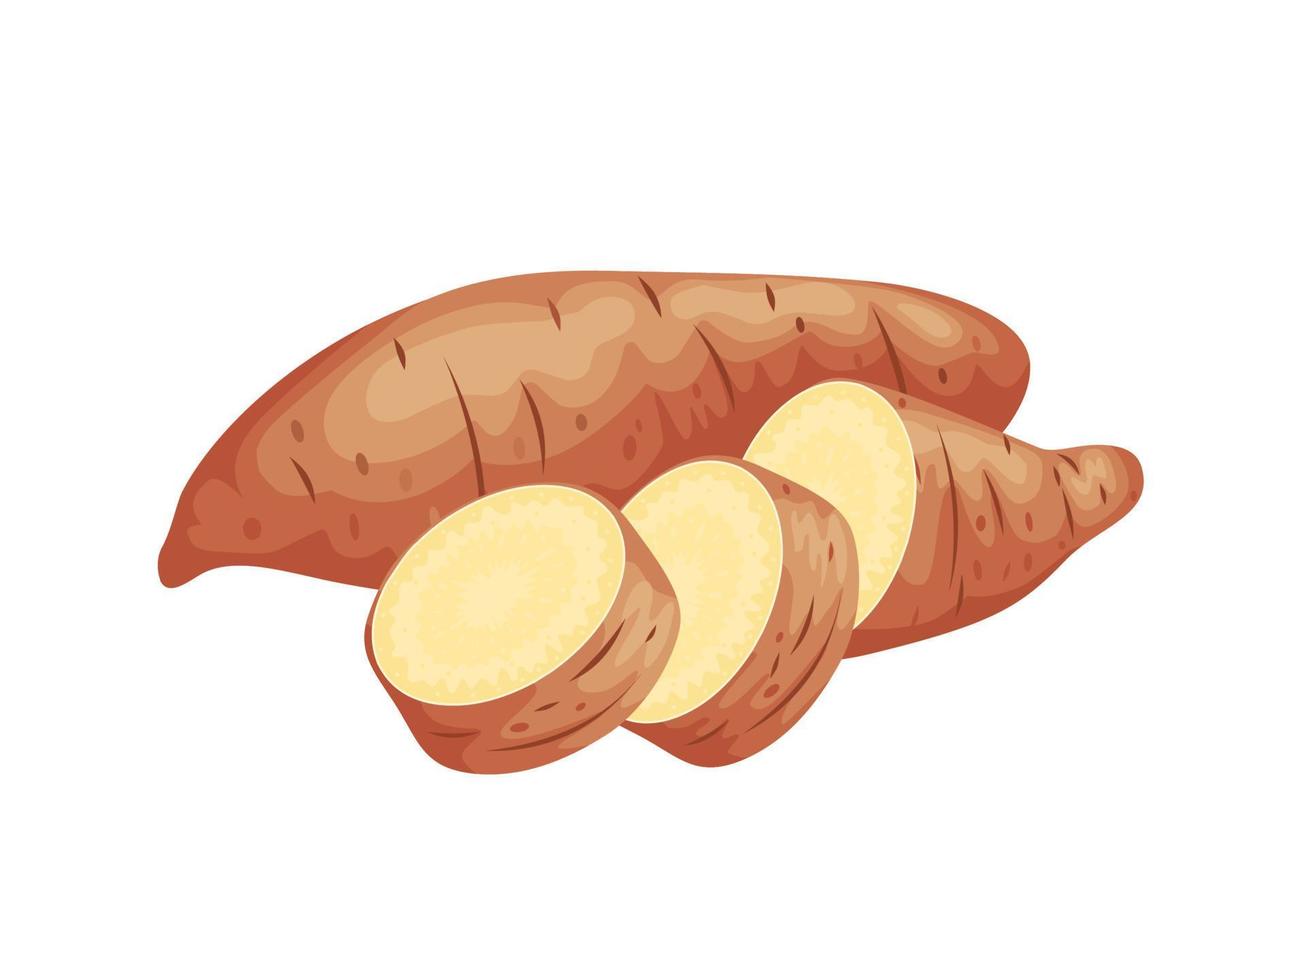 Vector illustration, sweet potato with brown skin, isolated on white, suitable for posters, websites, brochures and agricultural products packaging.